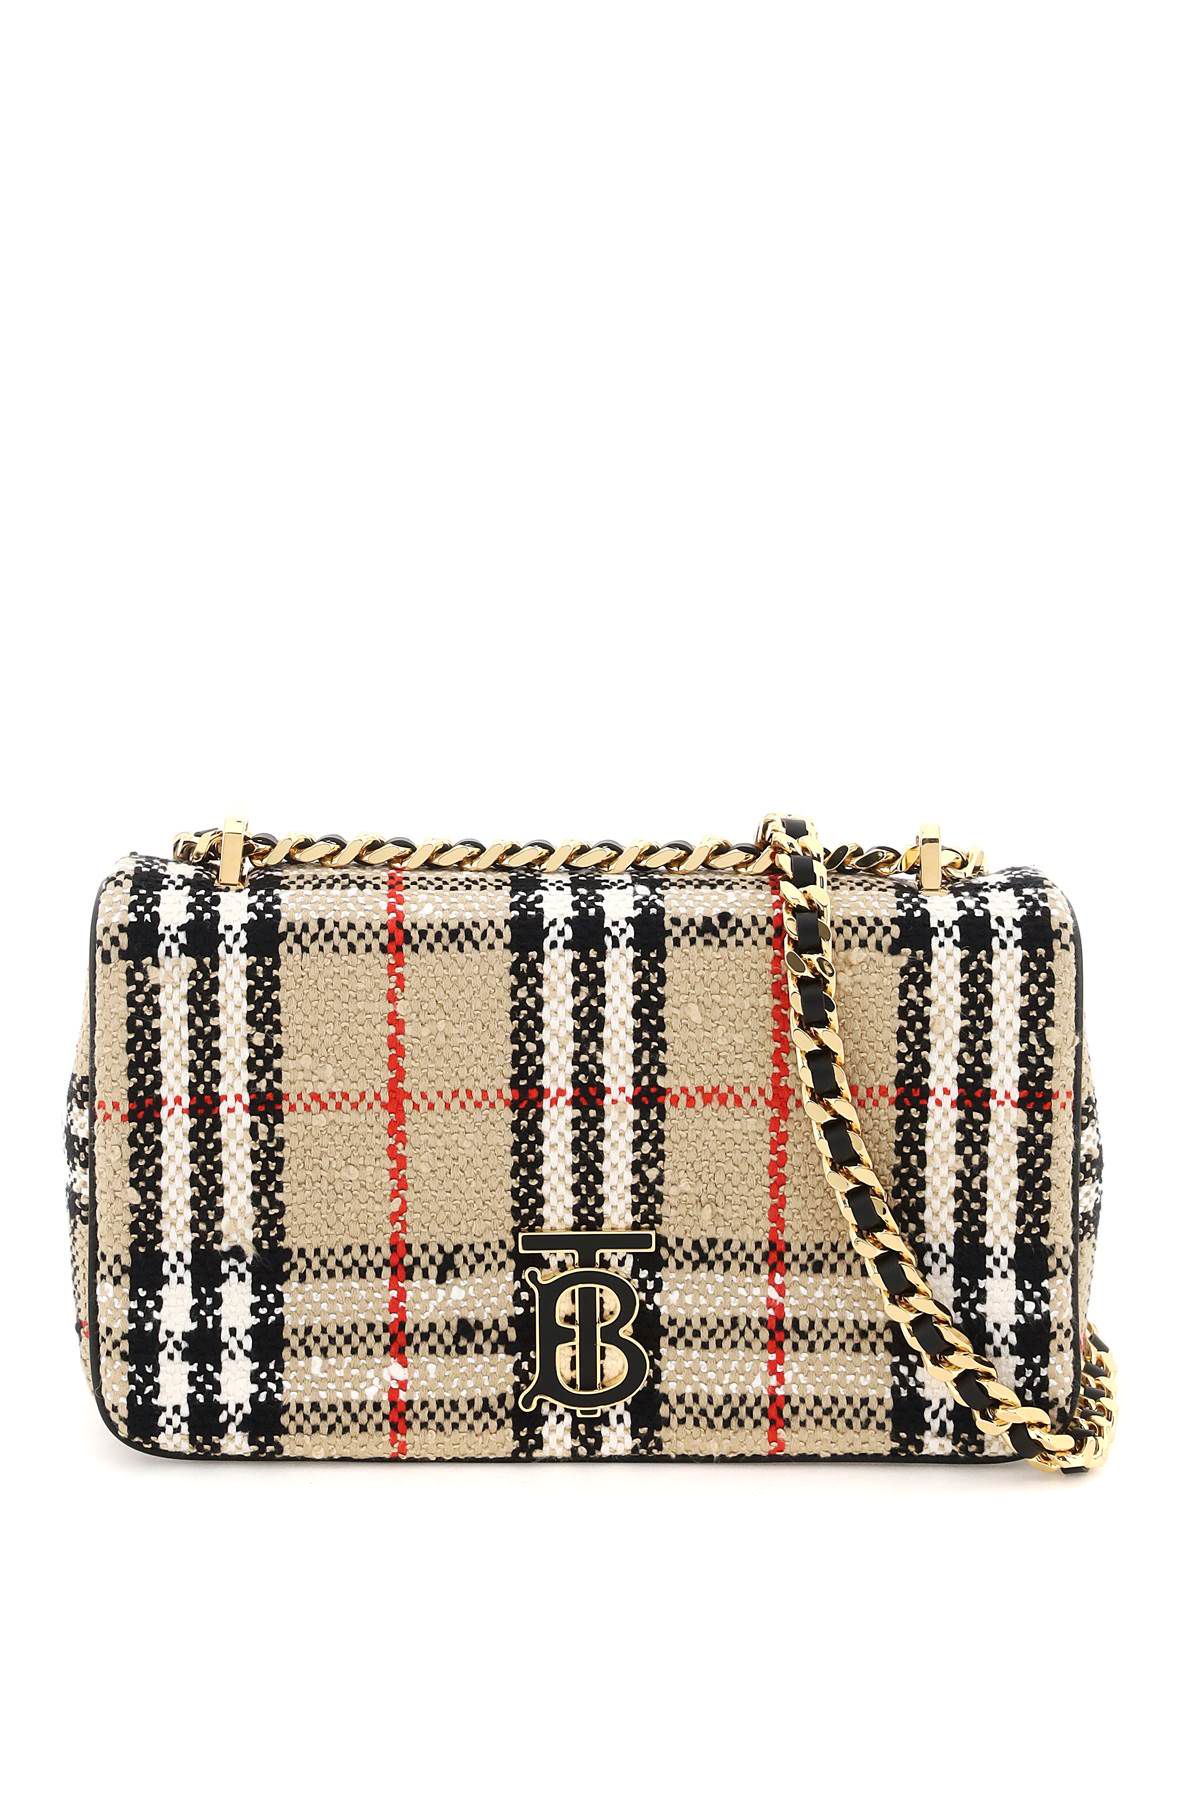 Burberry Lola Small Bag In Beige